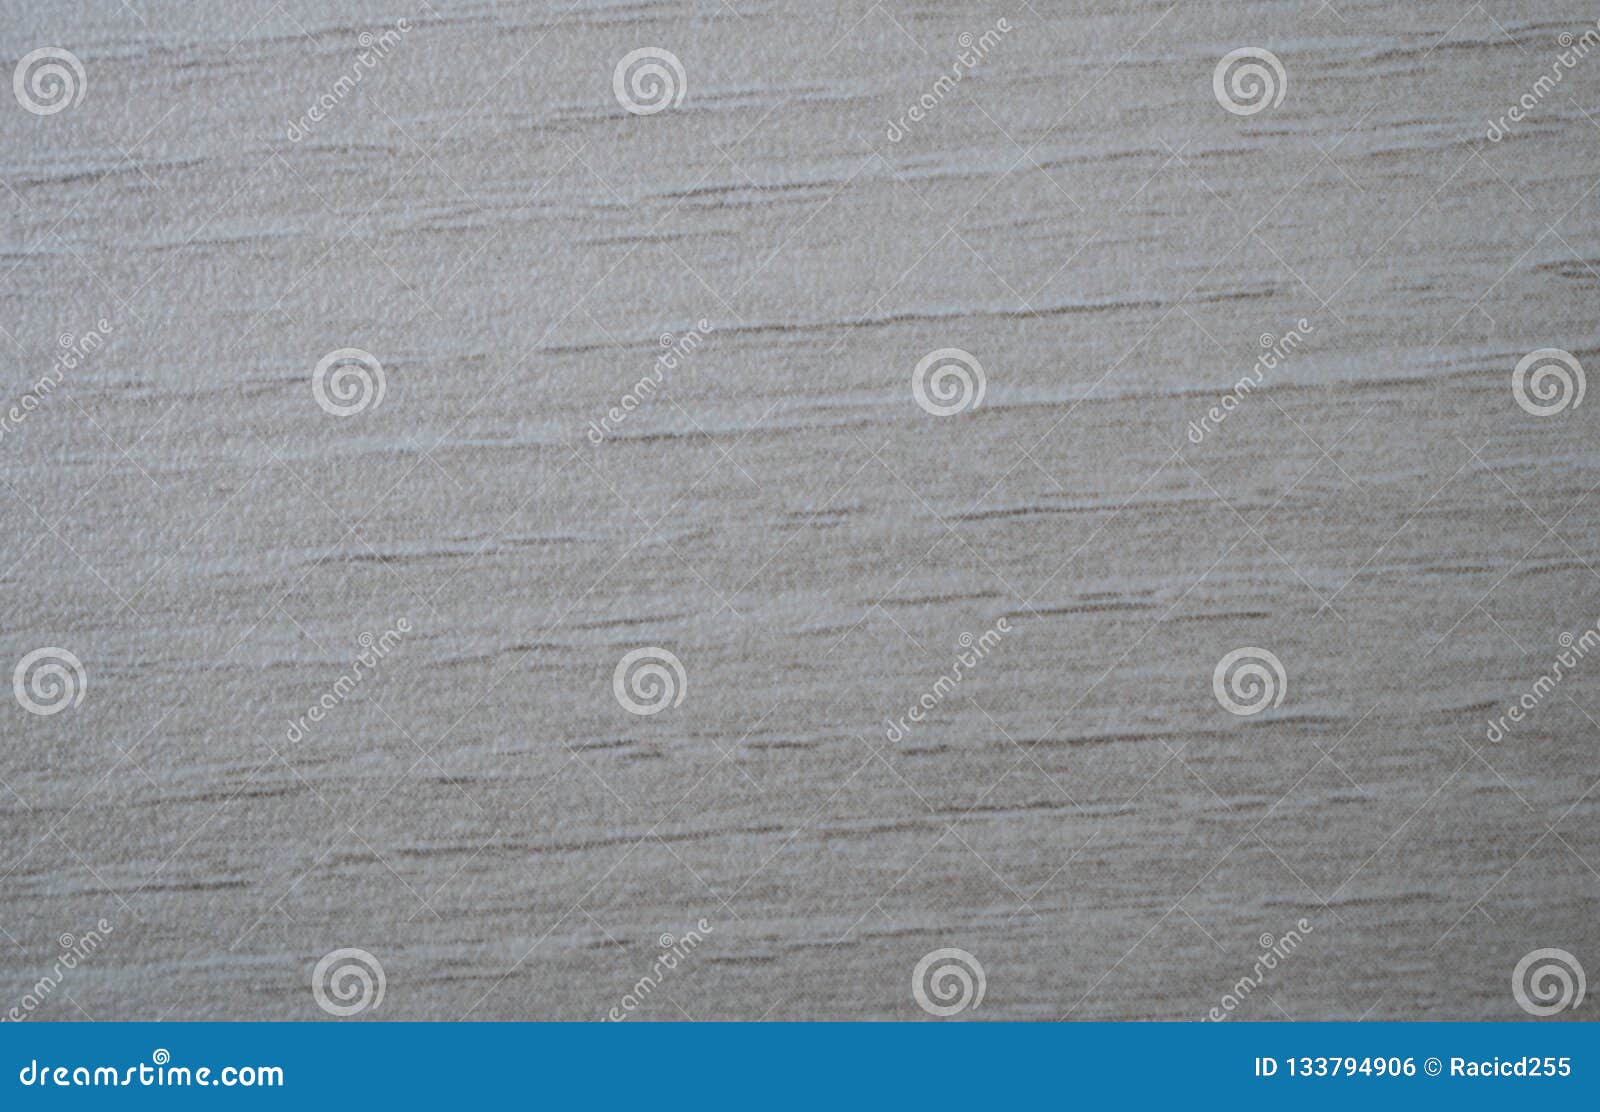 wood texture background. material, decorative.